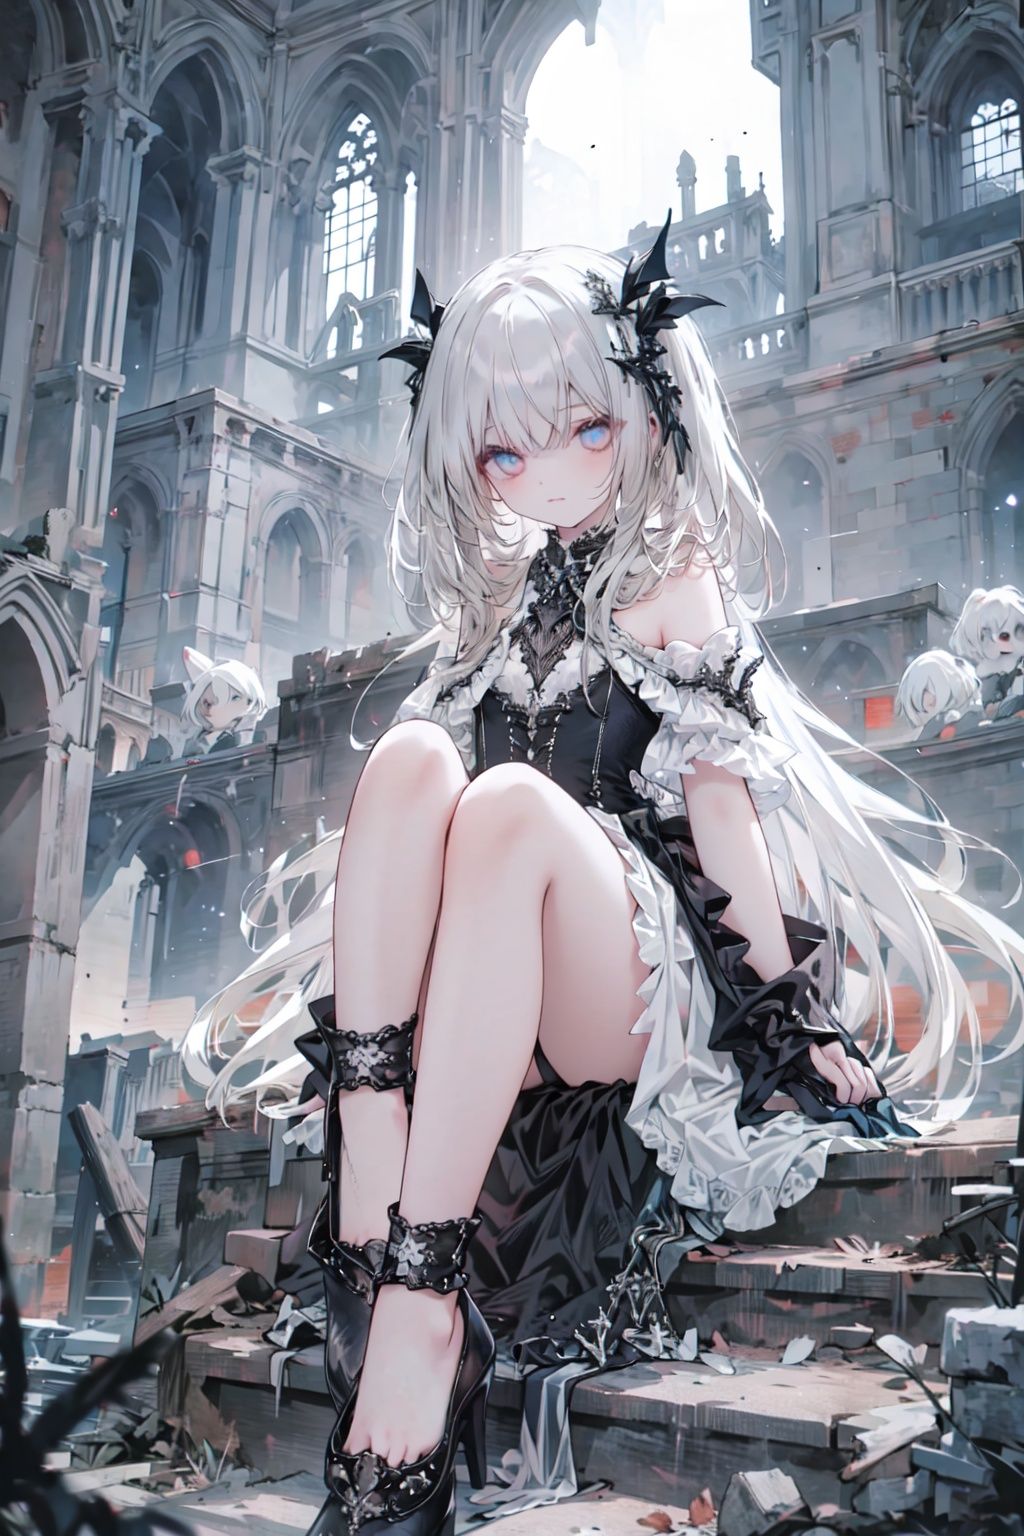  masterpiece, best quality, ((masterpiece)), flat chestbest quality, (highres), solo, flat chest, a girl inside the church with white hair and blue pupil surrounded by (many) glowing (feathers) in cold face, detailed face, night with bright colorful lights whith richly layered clouds and clouded moon in the detailed sky, (a lot of glowing particles),long hair,cool movement, (filigree), delicate and (intricate) hair, ((sliver)) and (broken) body, blue streaked hair, full body, depth of field, sitting on a (blue star), bishoujo,full body,no shoes,foot, galaxy nebula, vampire, qiuyinong